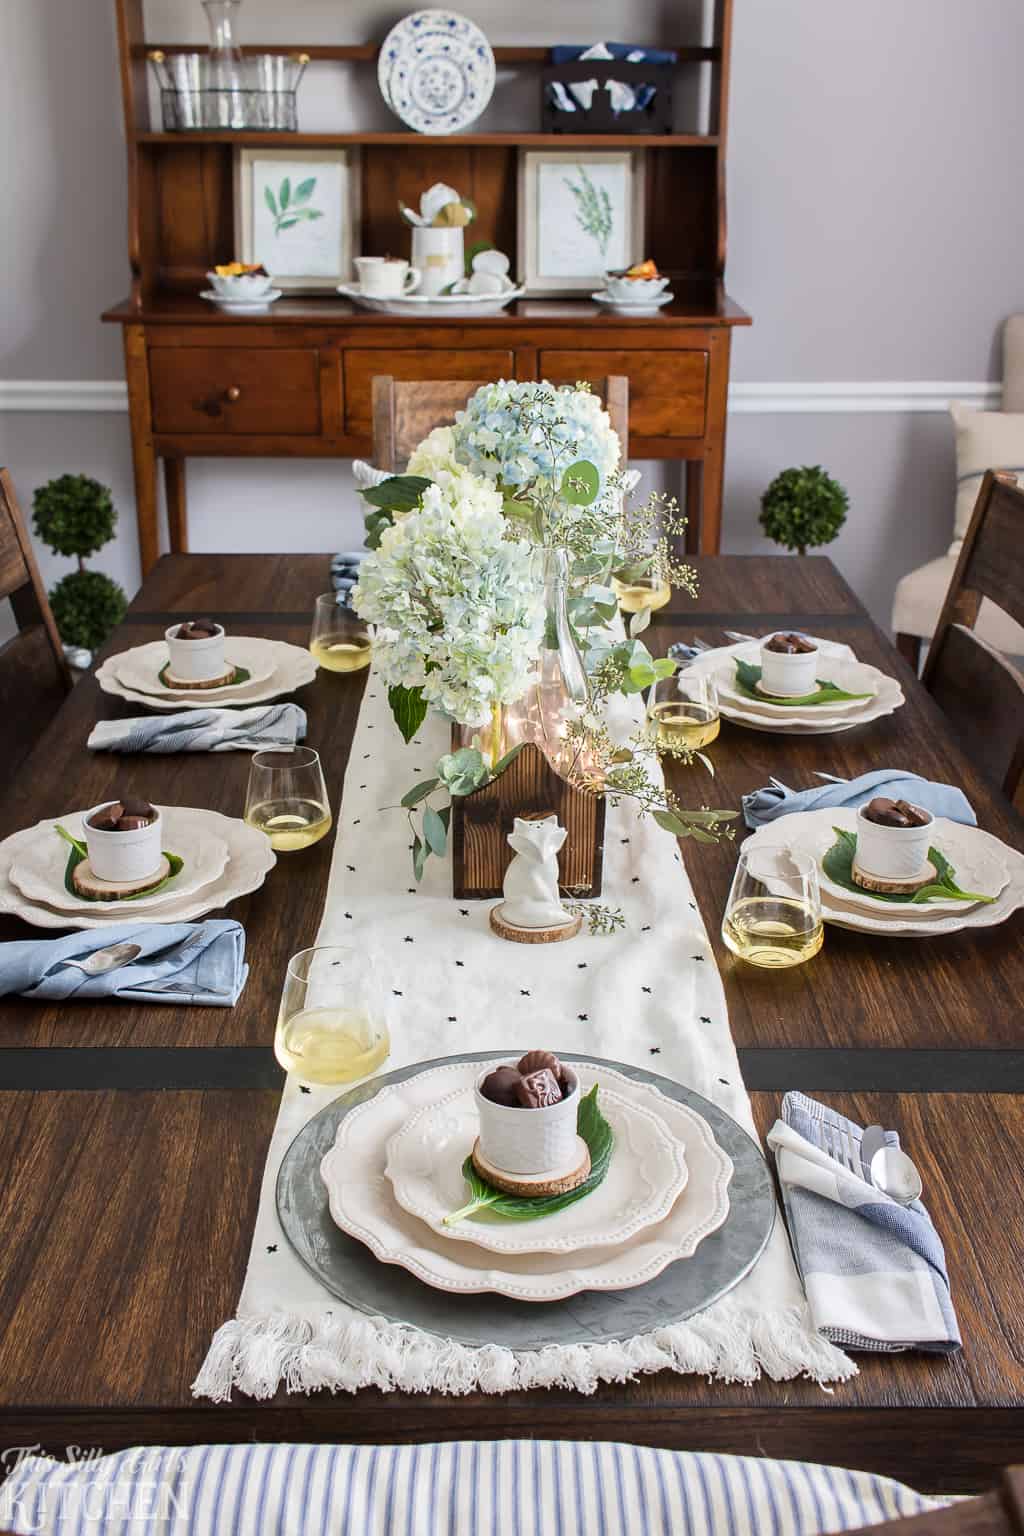 Modern Farmhouse Tablescape, a charming and inviting way to decorate for any party! From ThisSillyGirlsKitchen.com